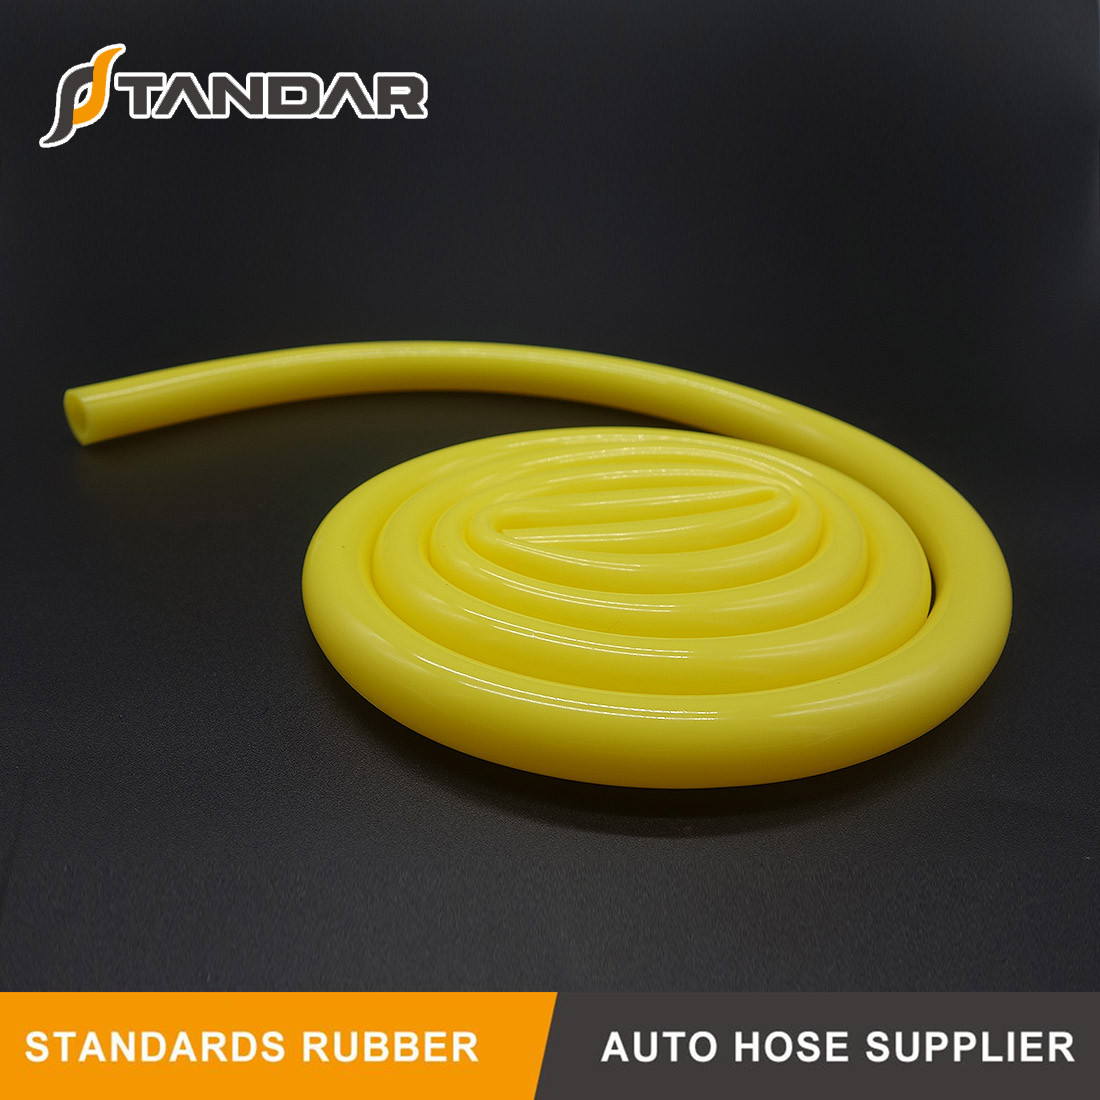 Maintenance measures need to be taken in real life applications of silicone hoses